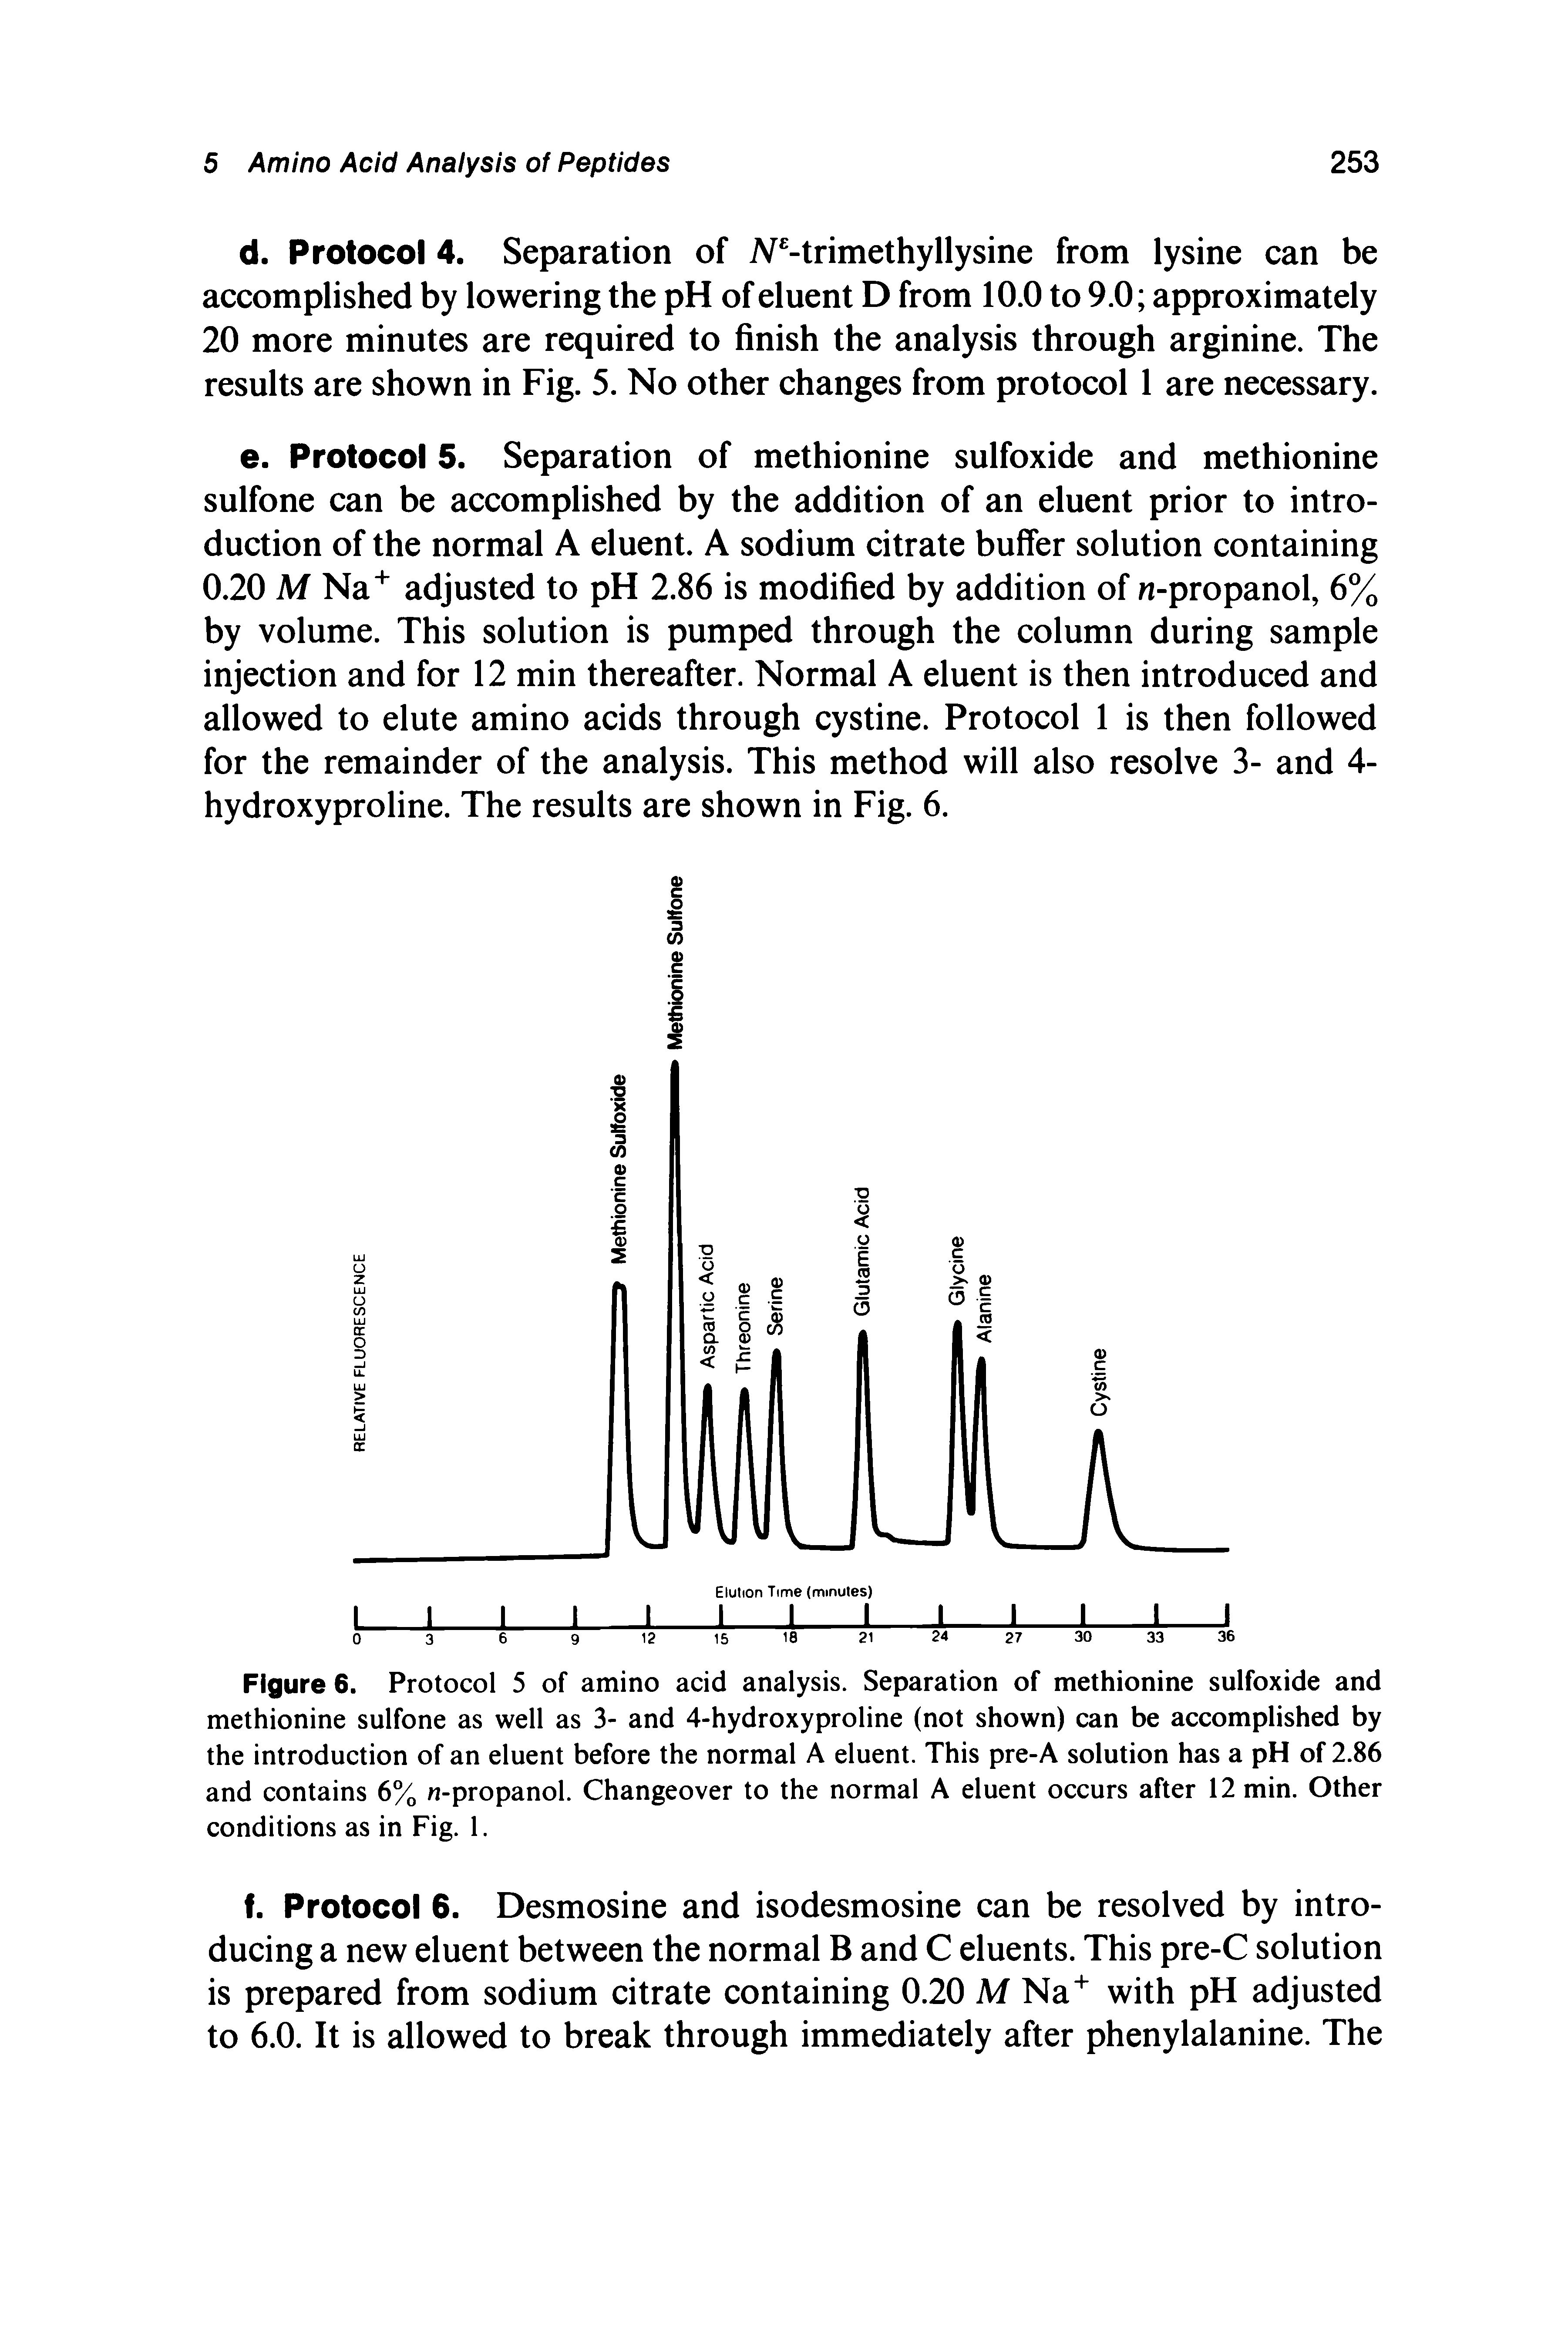 Figure 6. Protocol 5 of amino acid analysis. Separation of methionine sulfoxide and methionine sulfone as well as 3- and 4-hydroxyproline (not shown) can be accomplished by the introduction of an eluent before the normal A eluent. This pre-A solution has a pH of 2.86 and contains 6% n-propanol. Changeover to the normal A eluent occurs after 12 min. Other conditions as in Fig. 1.